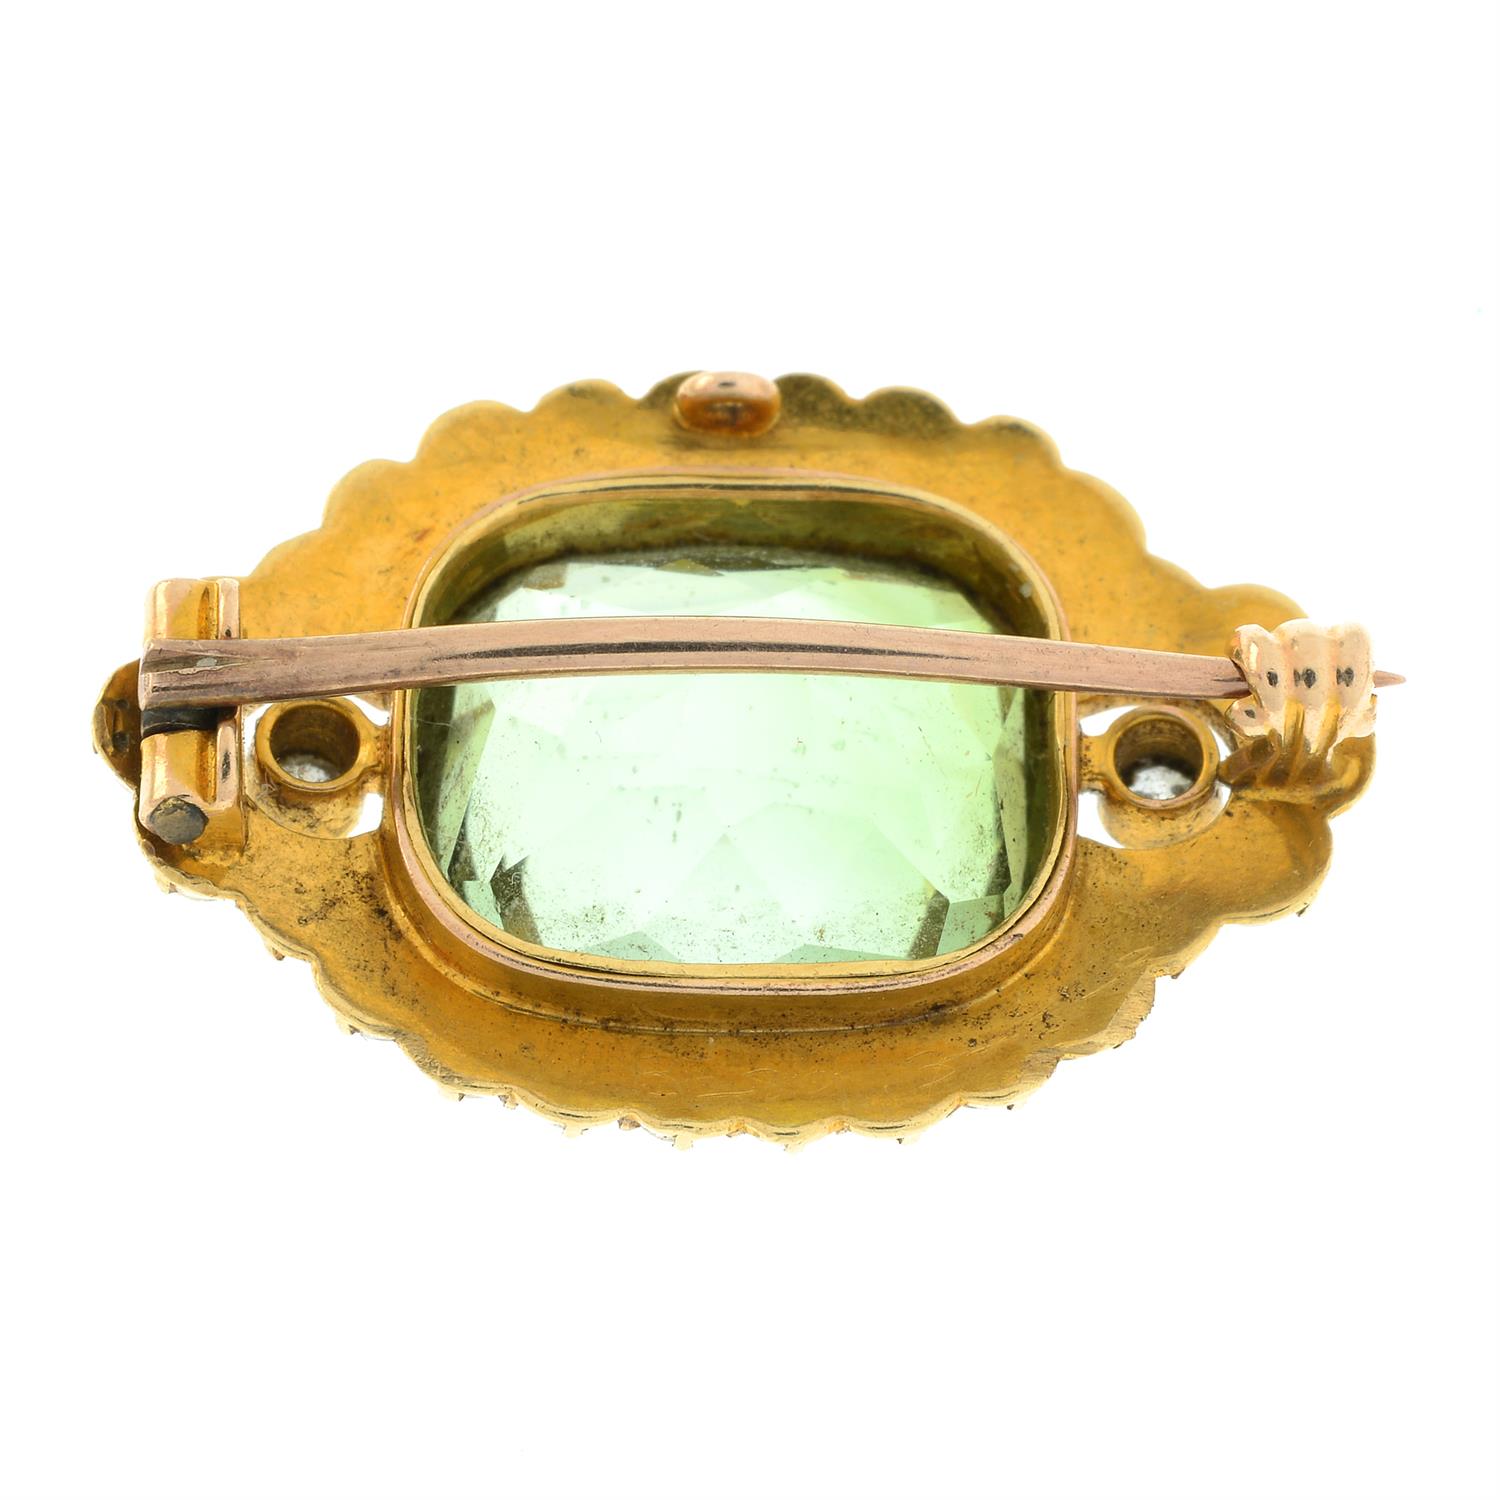 A late 19th century gold green tourmaline brooch, with split pearl and old-cut diamond surround. - Image 3 of 4